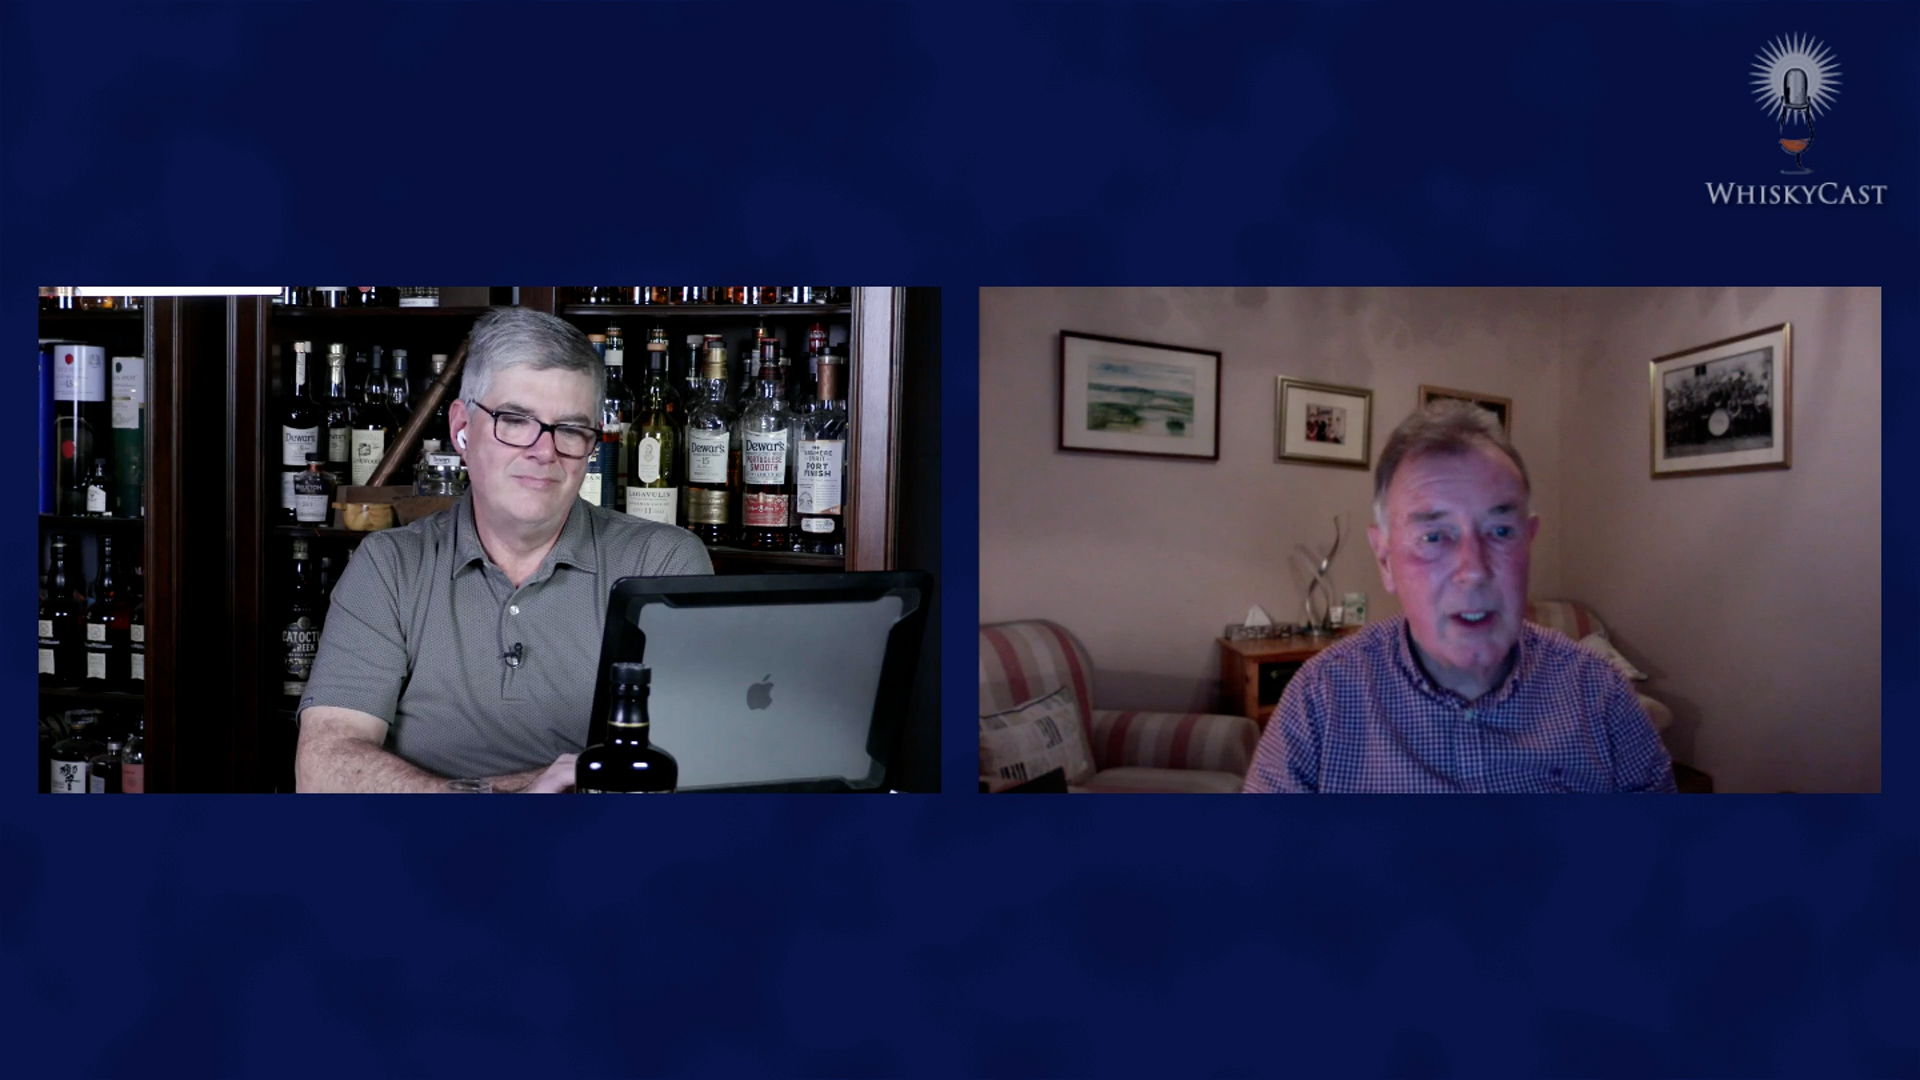 Scotch Whisky legend Jim McEwan joined us on Friday night's #HappyHour webcast. His memoir "A Journeyman's Journey" will be published in Germany this April.